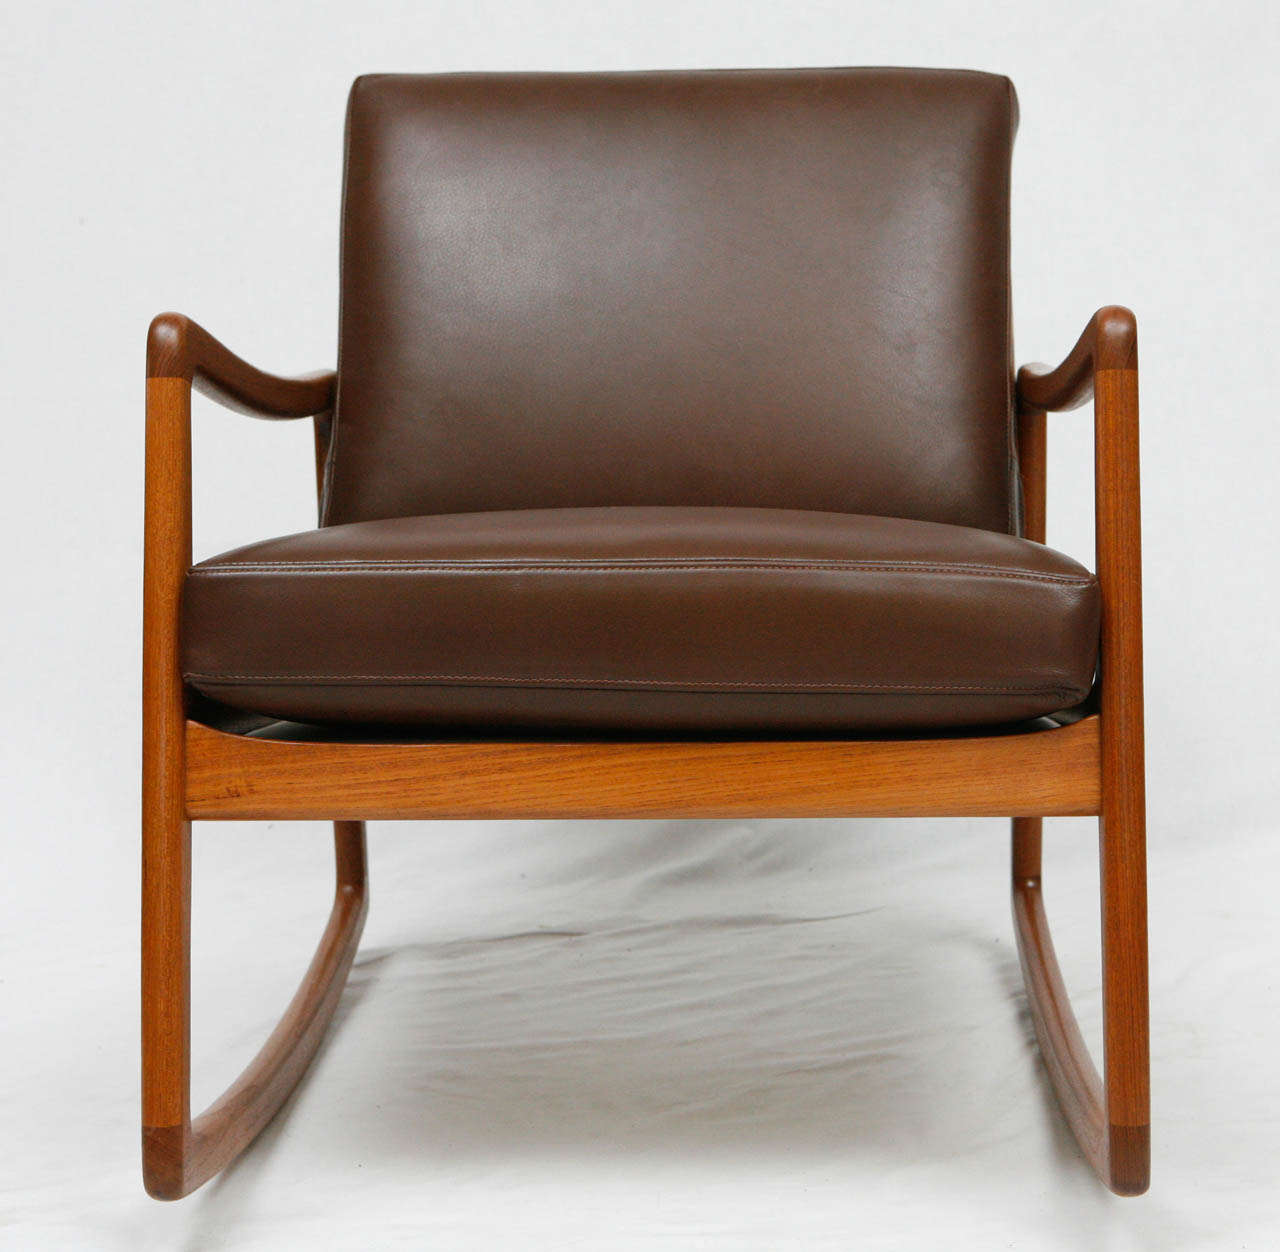 Ole wanscher rocking chair.  Designed in 1951 and produced By France & Son.